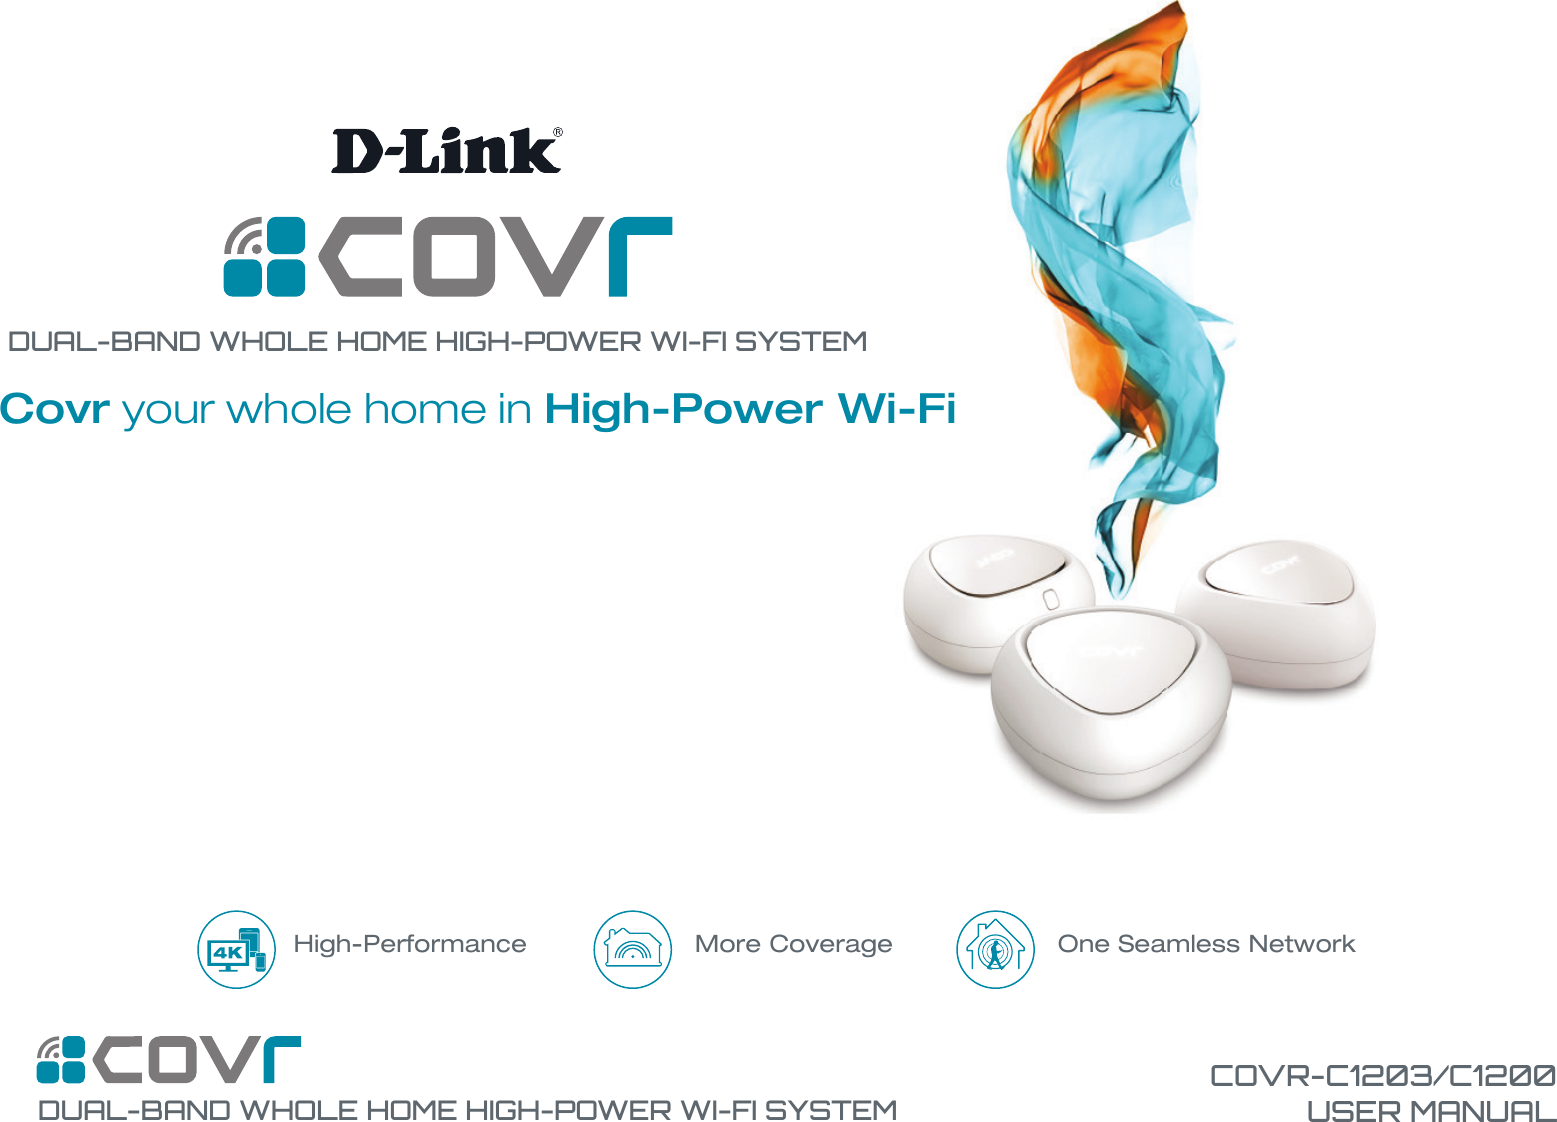 DUAL-BAND WHOLE HOME HIGH-POWER WI-FI SYSTEMCOVR-C1203/C1200USER MANUALCovr your whole home in High-Power Wi-FiDUAL-BAND WHOLE HOME HIGH-POWER WI-FI SYSTEMOne Seamless NetworkMore CoverageHigh-Performance